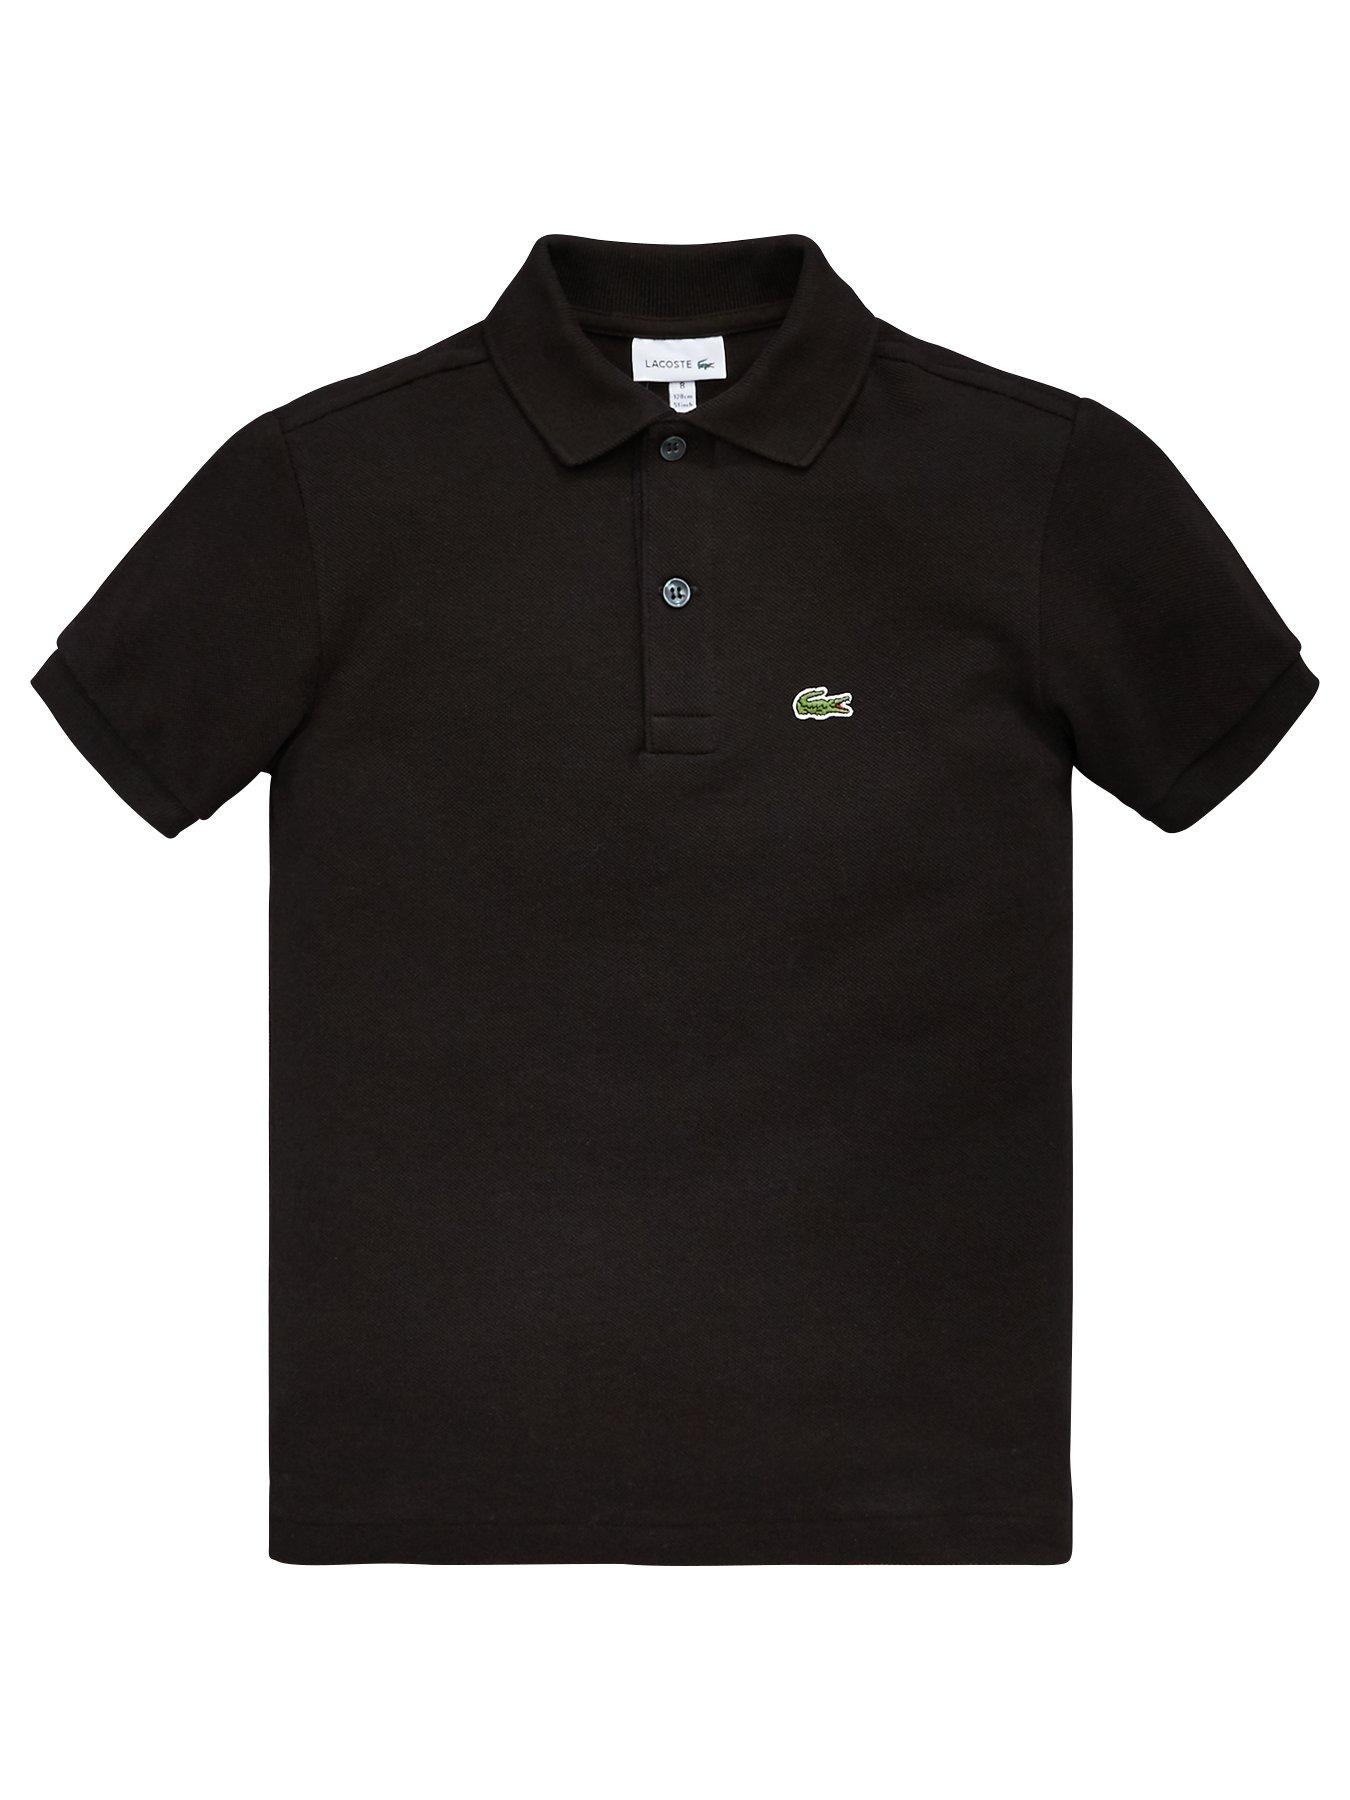 2/3 years | Lacoste | Boys Child & baby | www.very.co.uk